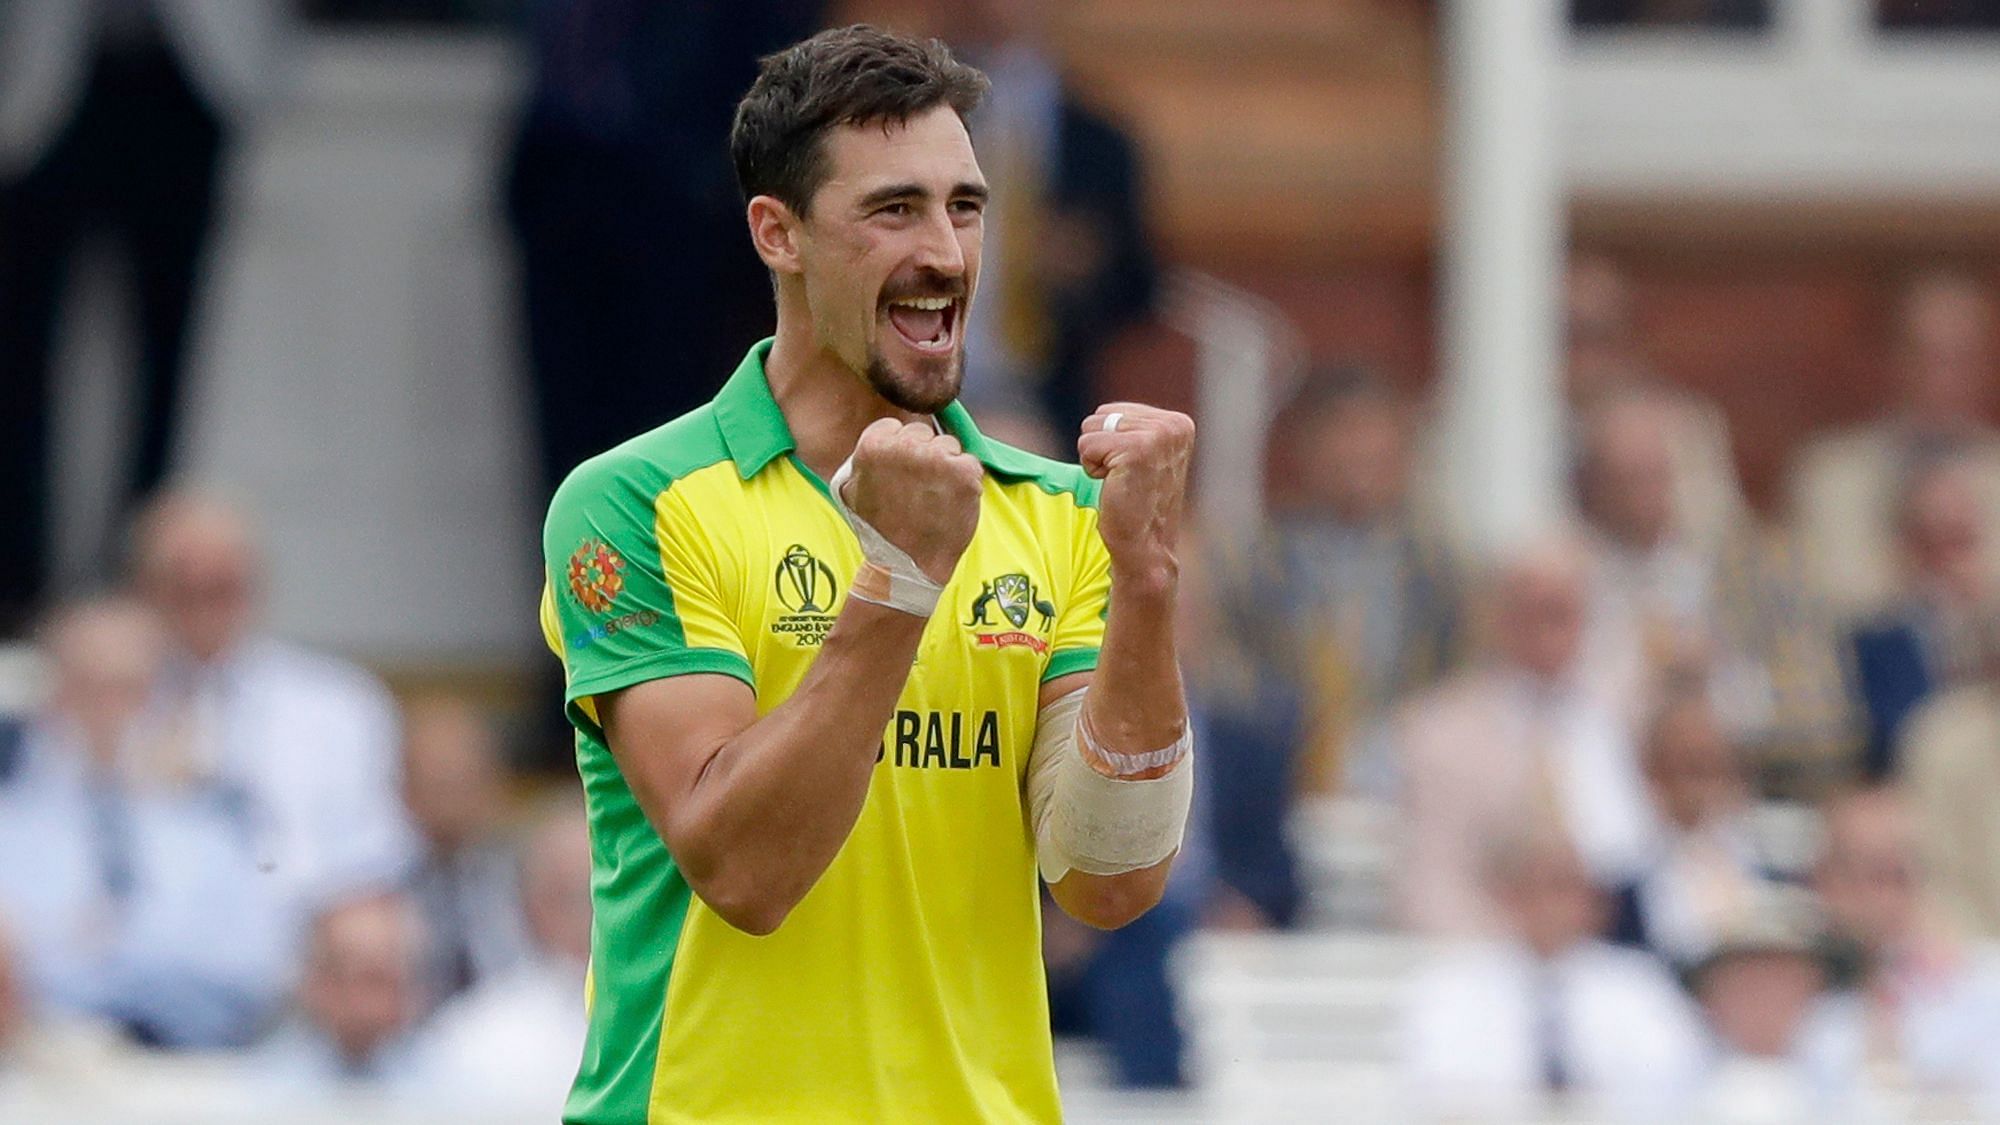 Mitchell Starc finished with impressive figures of 8.4-1-43-4 against England at Lord’s